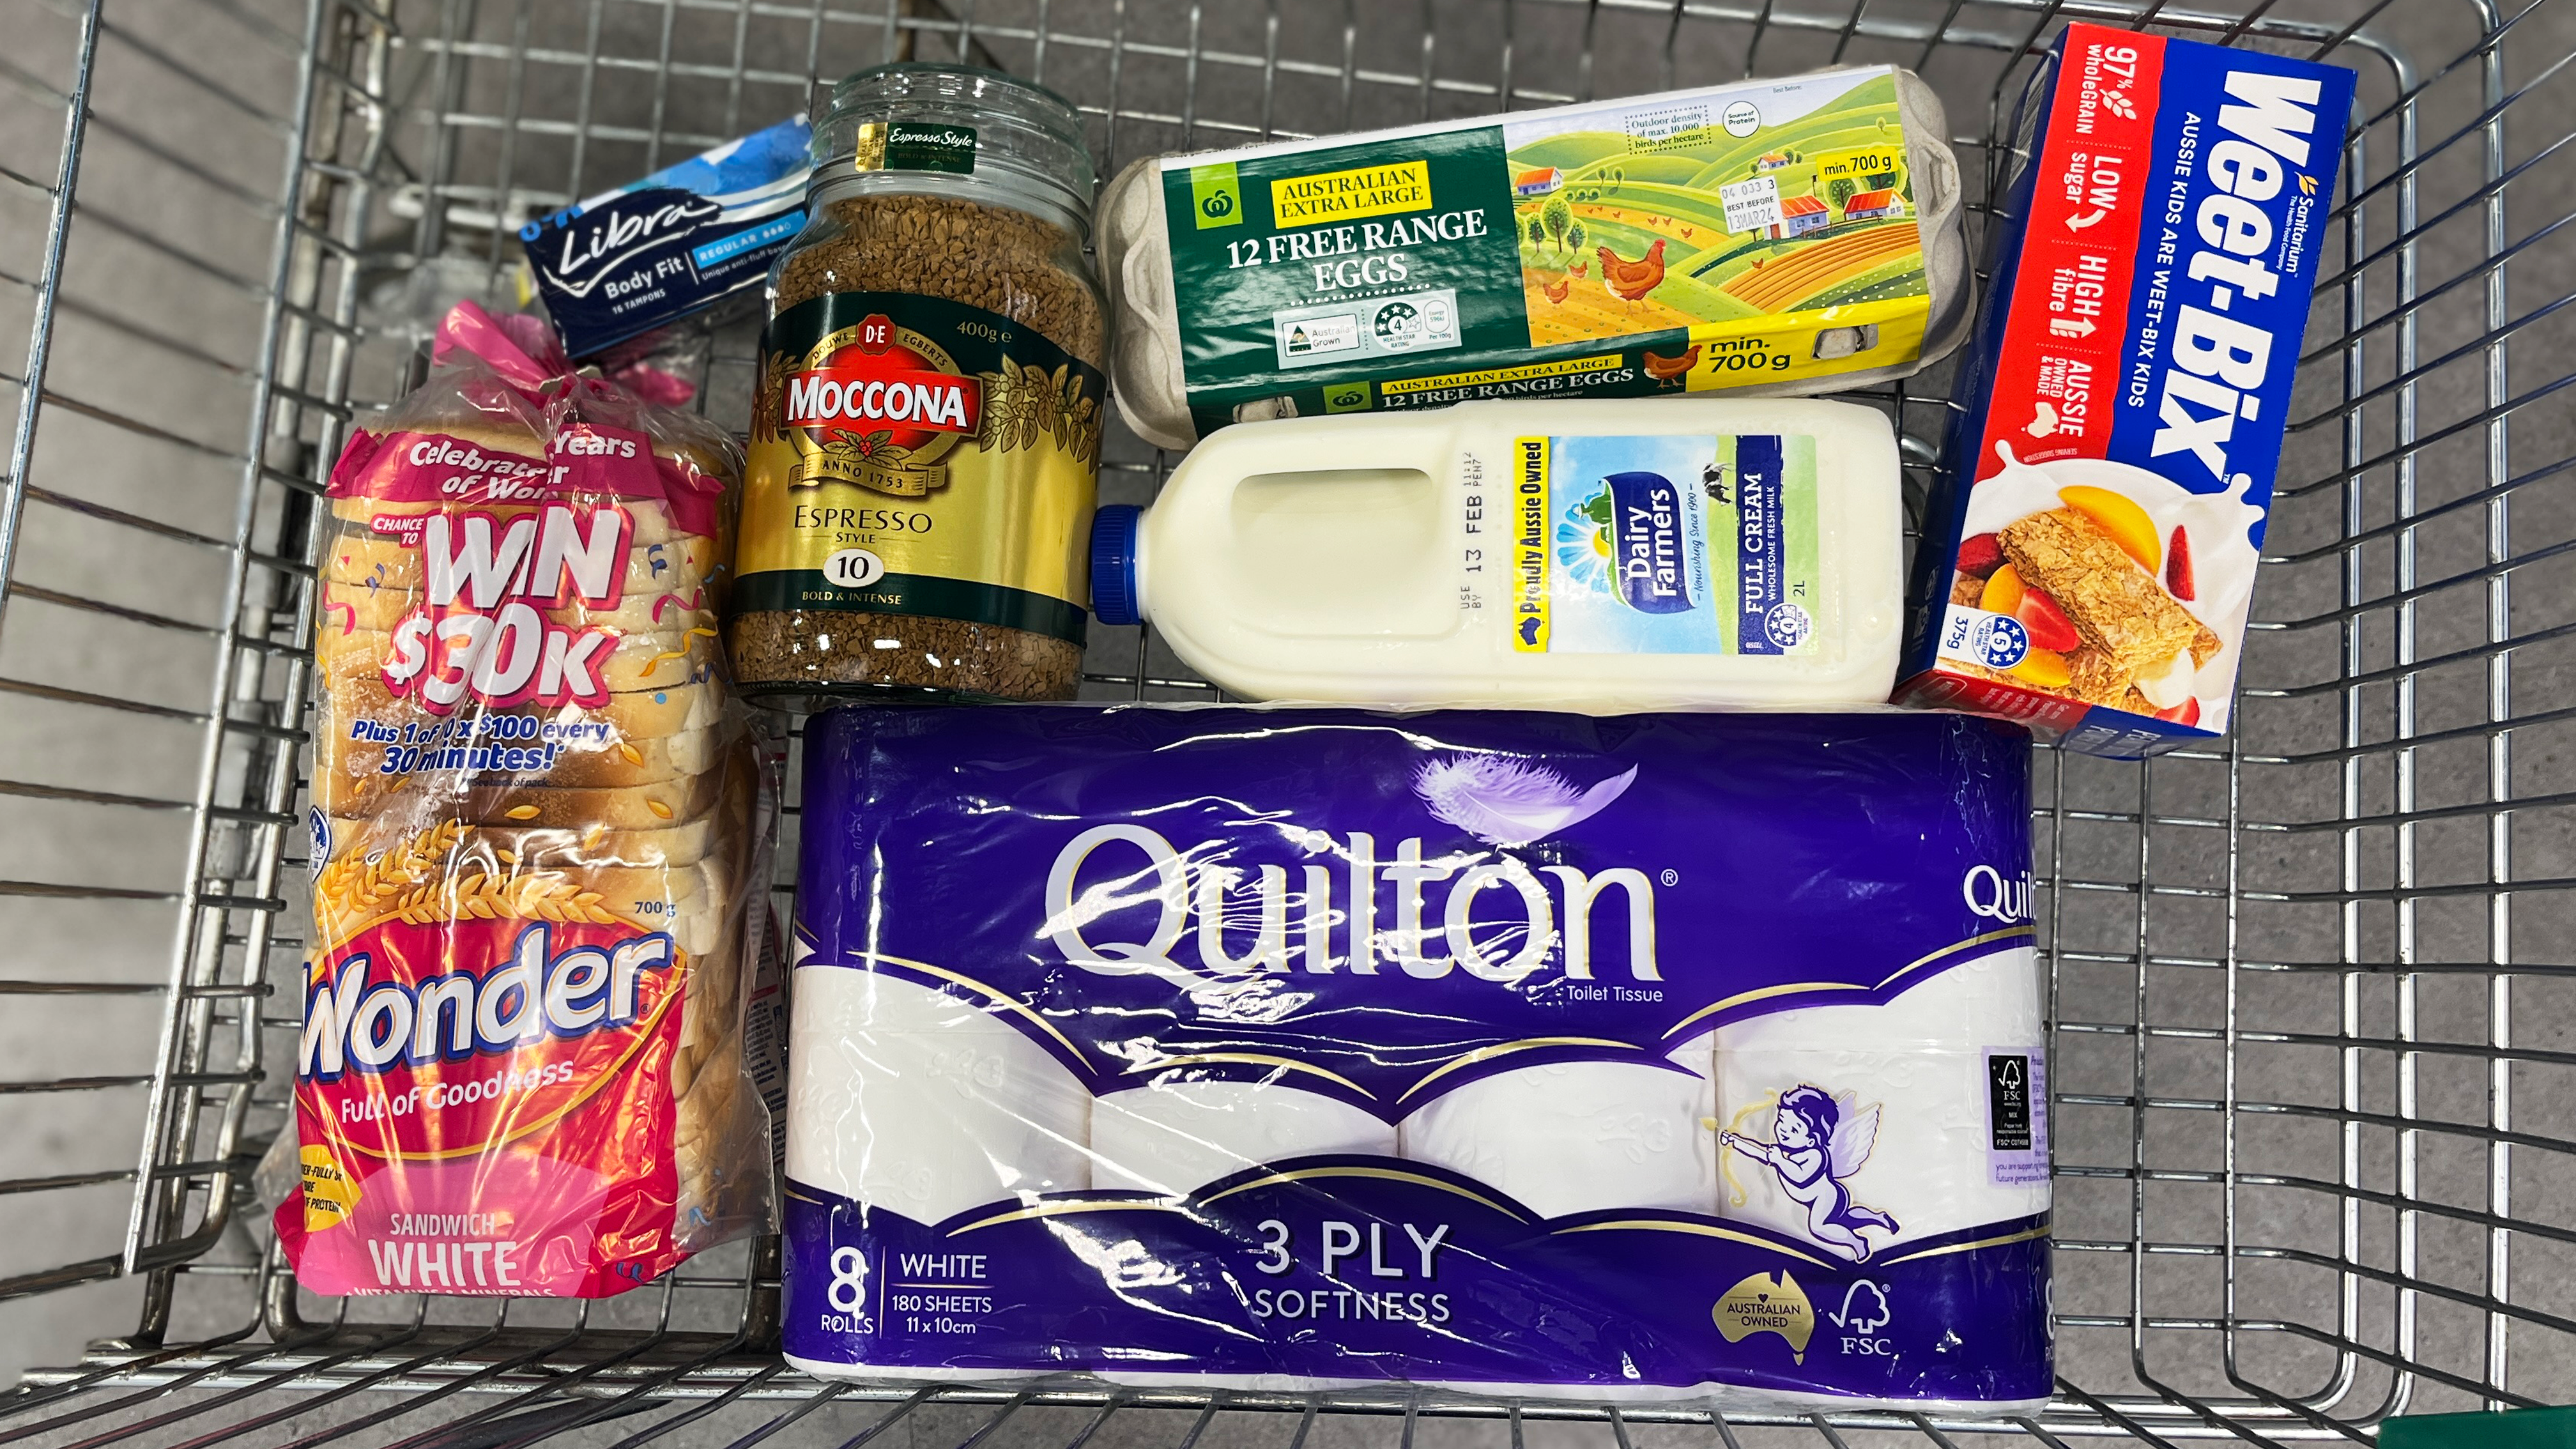 A trolley of grocery store items, including toliet paper, tampons, Weet-bix, white sliced bread, instant coffee, eggs and milk. 